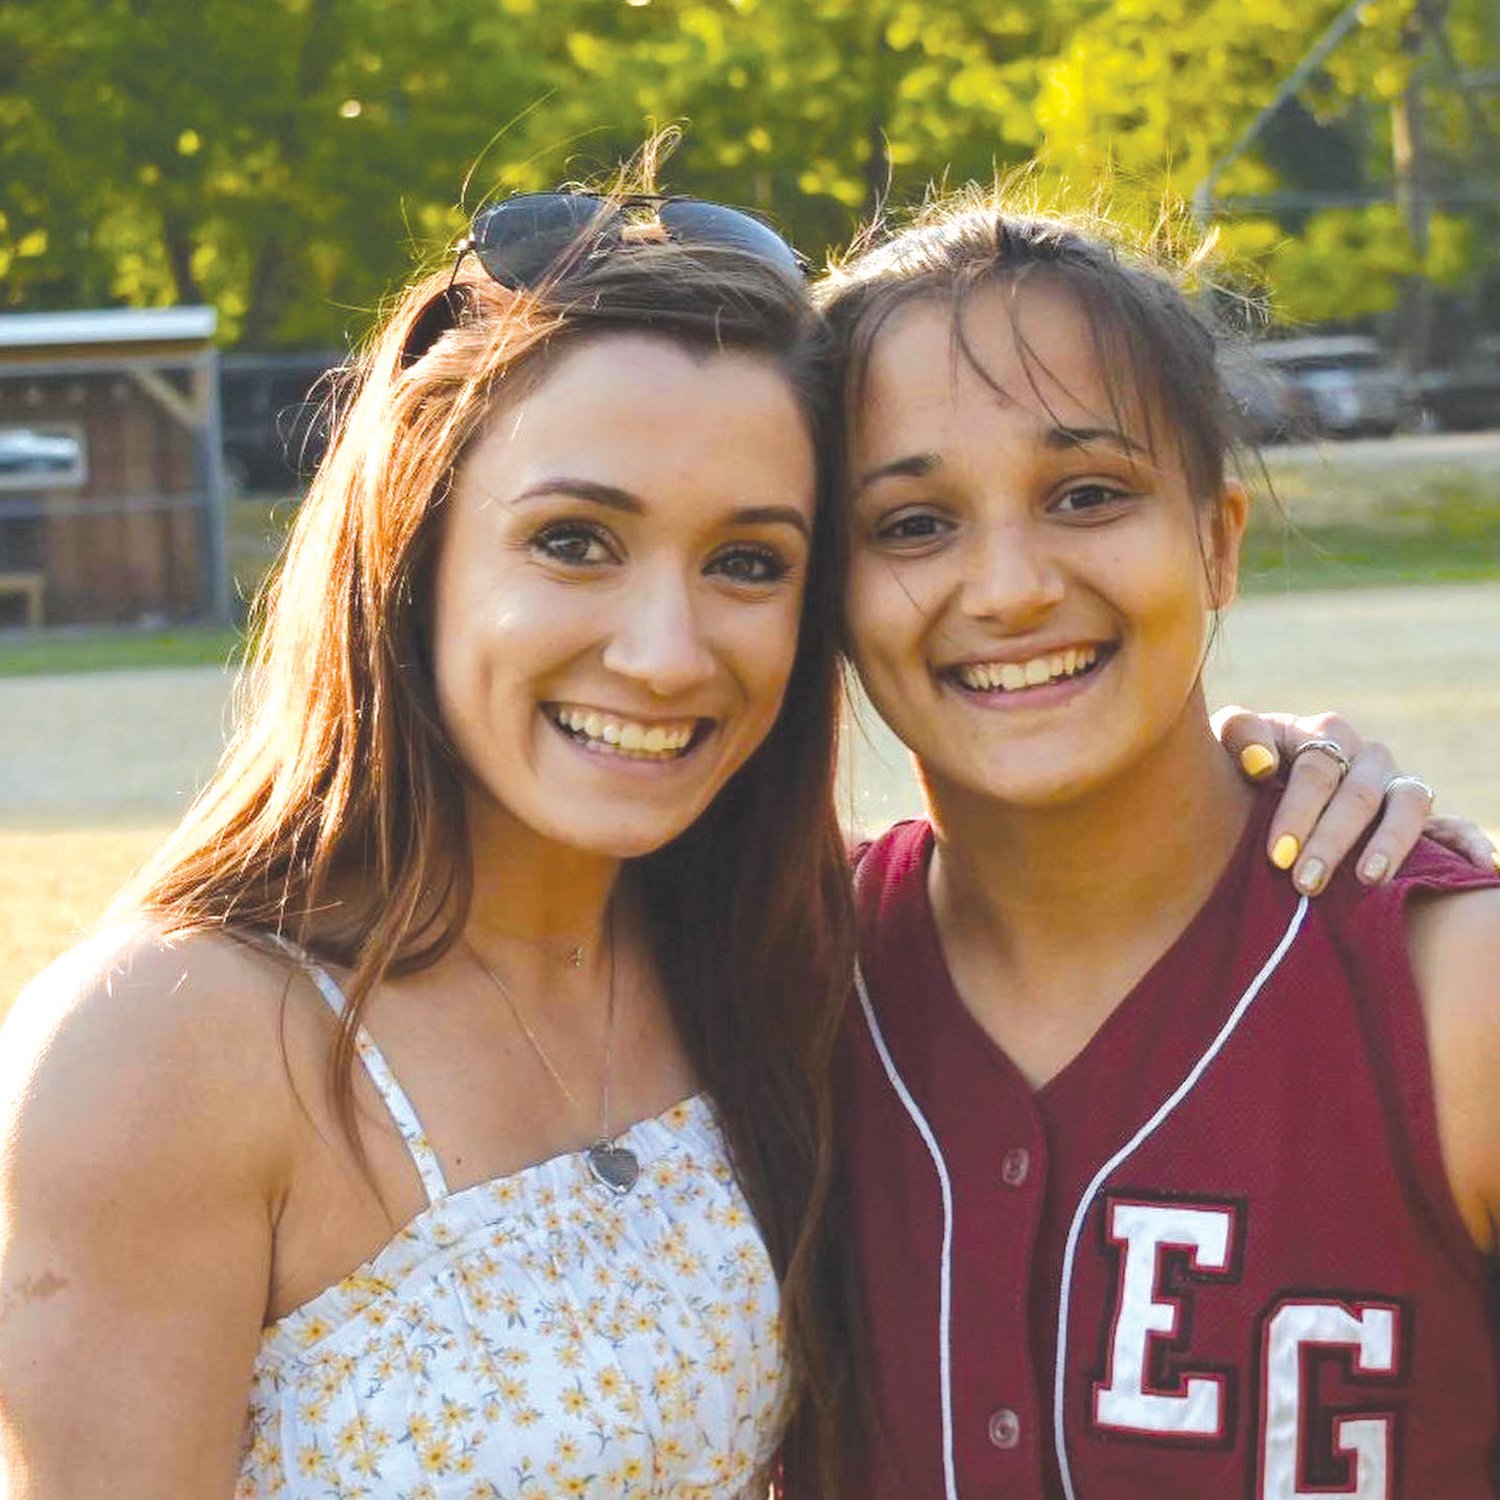 PLAYERS TOGETHER: Sisters Victoria and Olivia Passaretti loved playing softball.